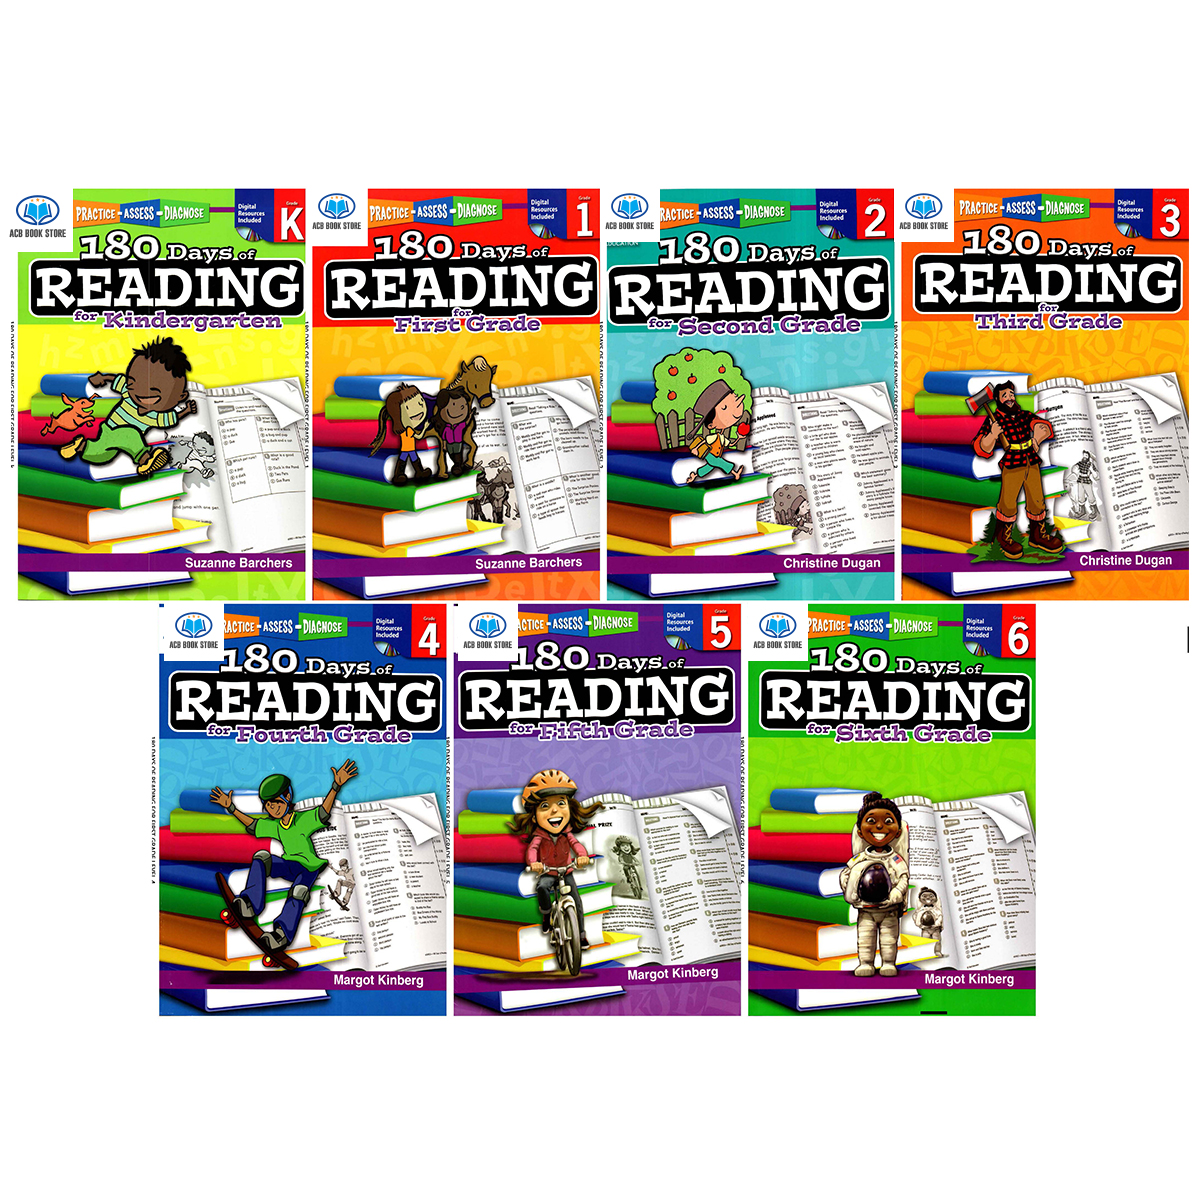 Sách 180 DAYS OF READING FOR KINDERGARTEN LEVEL K-6 - ACB Bookstore